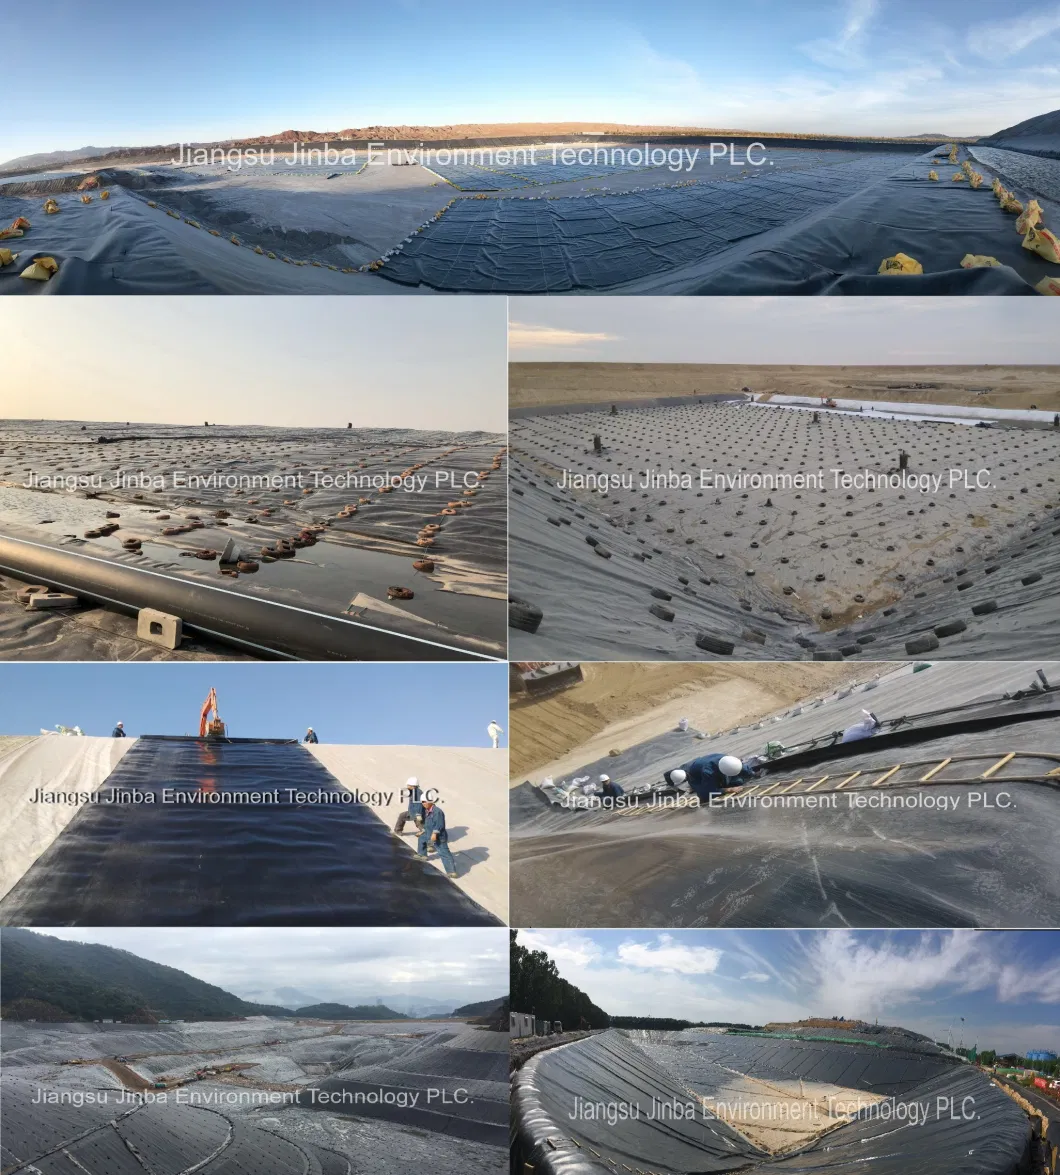 Thickness 1.25mm Anti-Seepage Impervious Double-Sided Textured LLDPE Geomembrane